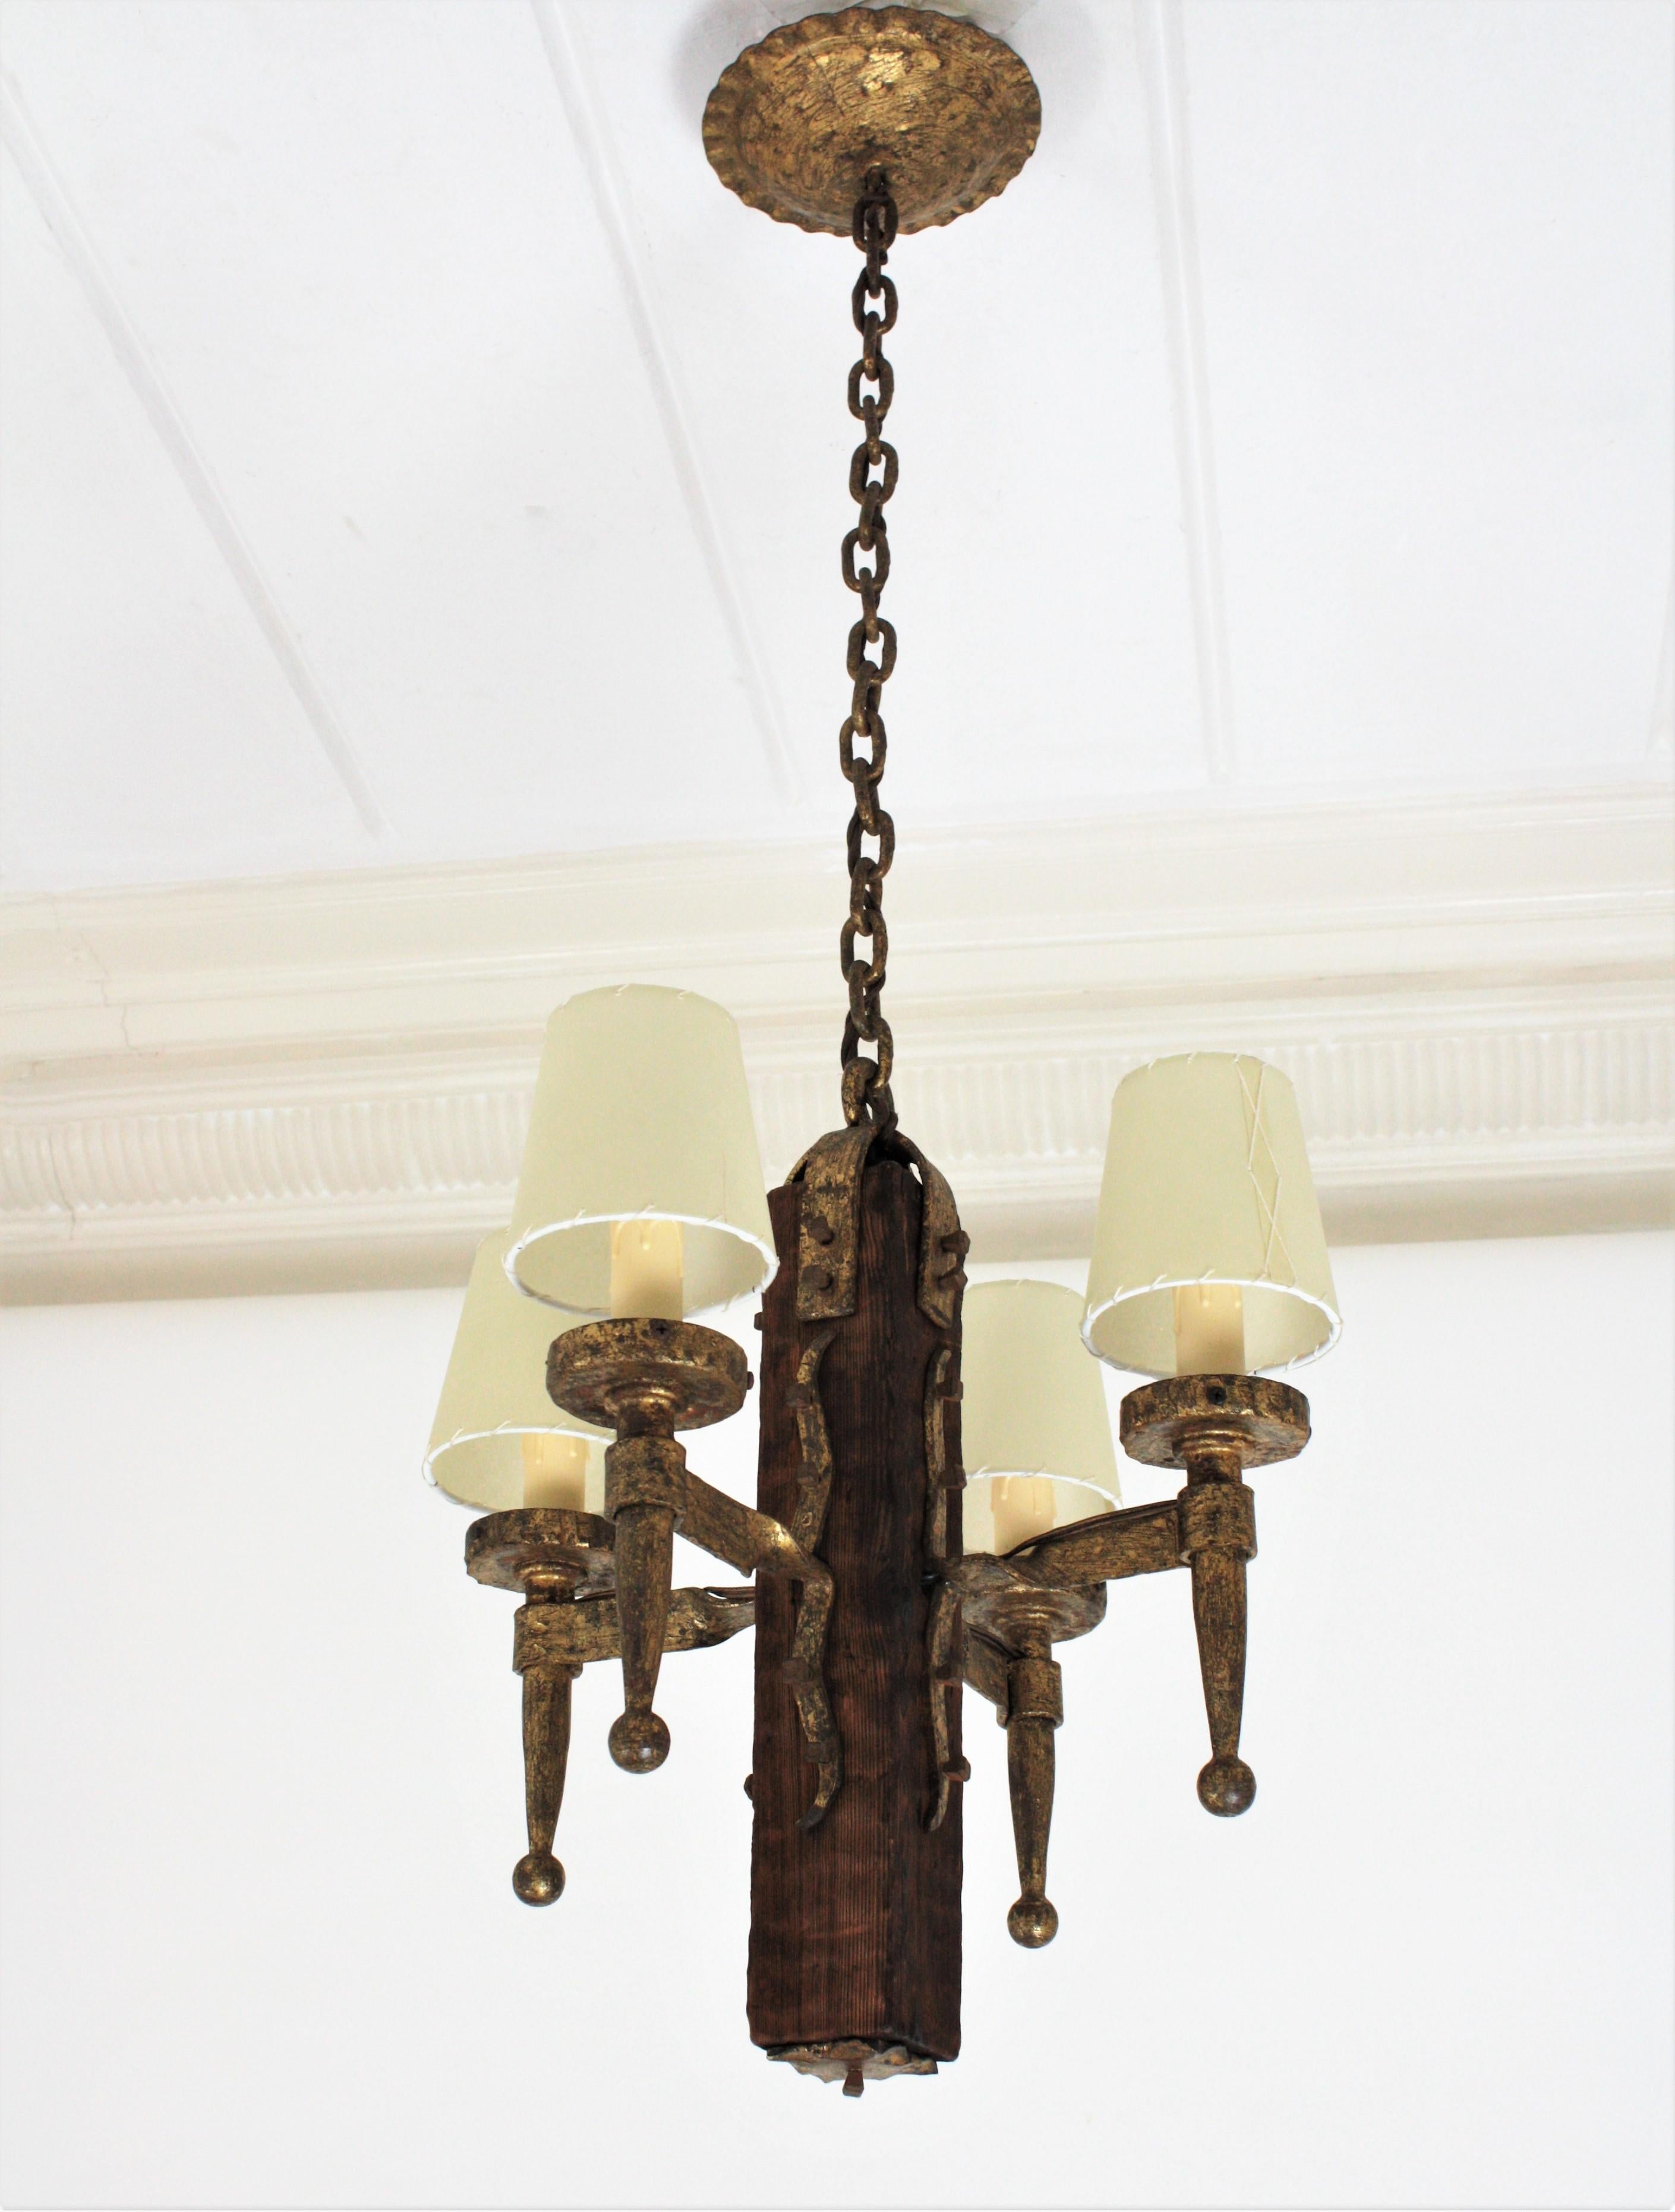 Gothic Revival Spanish Gothic Style Chandelier in Gilt Wrought Iron and Wood with Nail Details